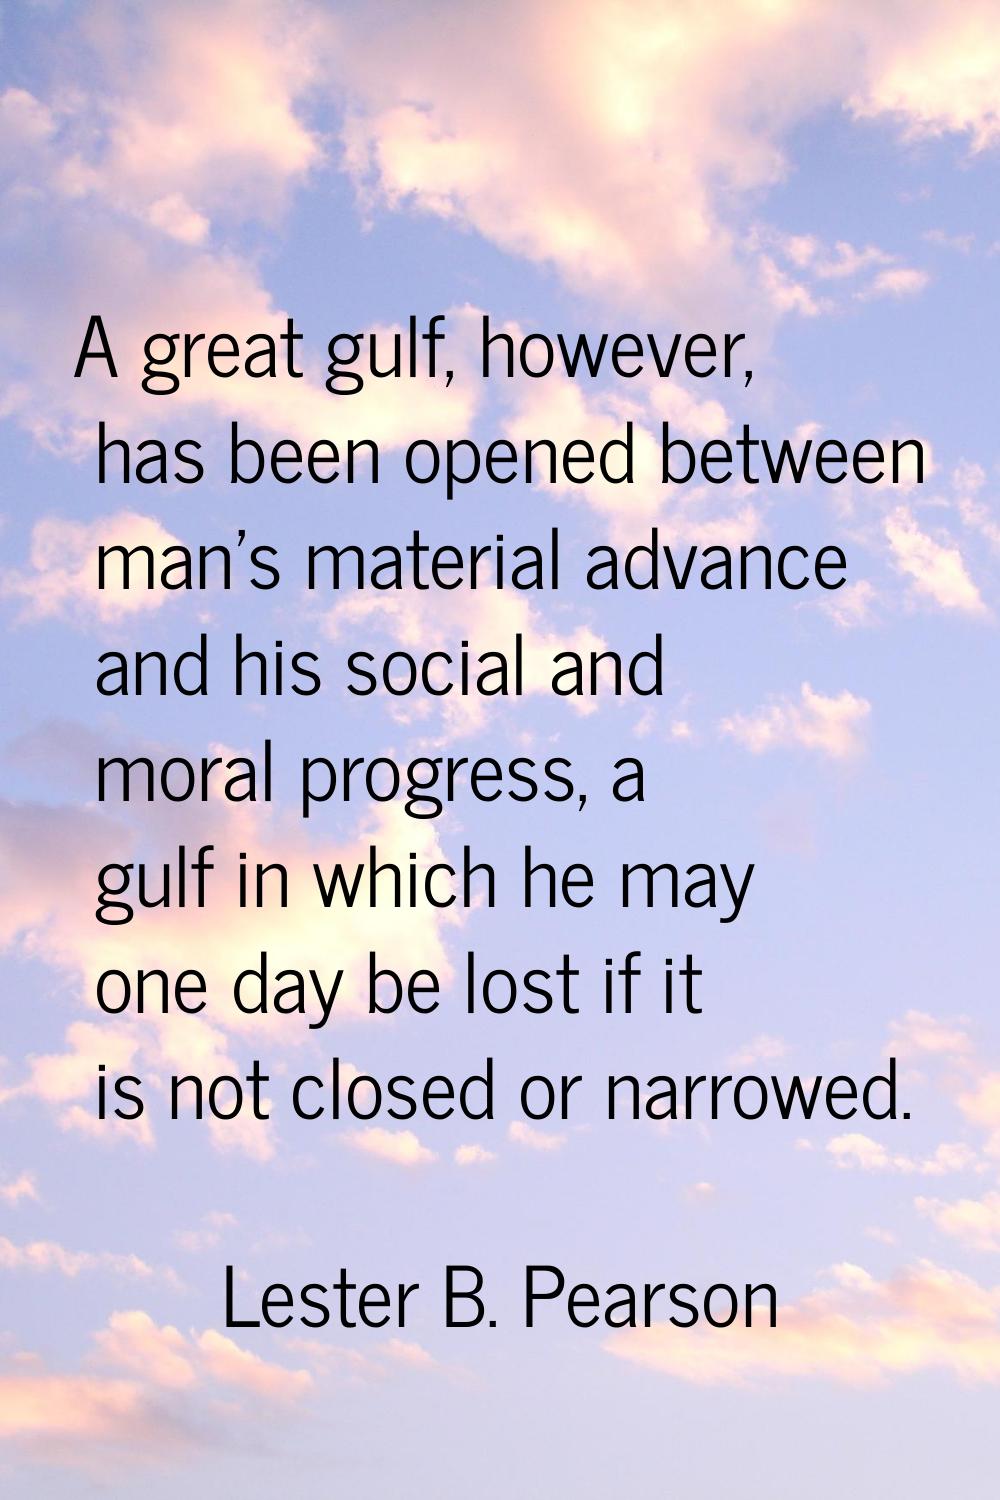 A great gulf, however, has been opened between man's material advance and his social and moral prog